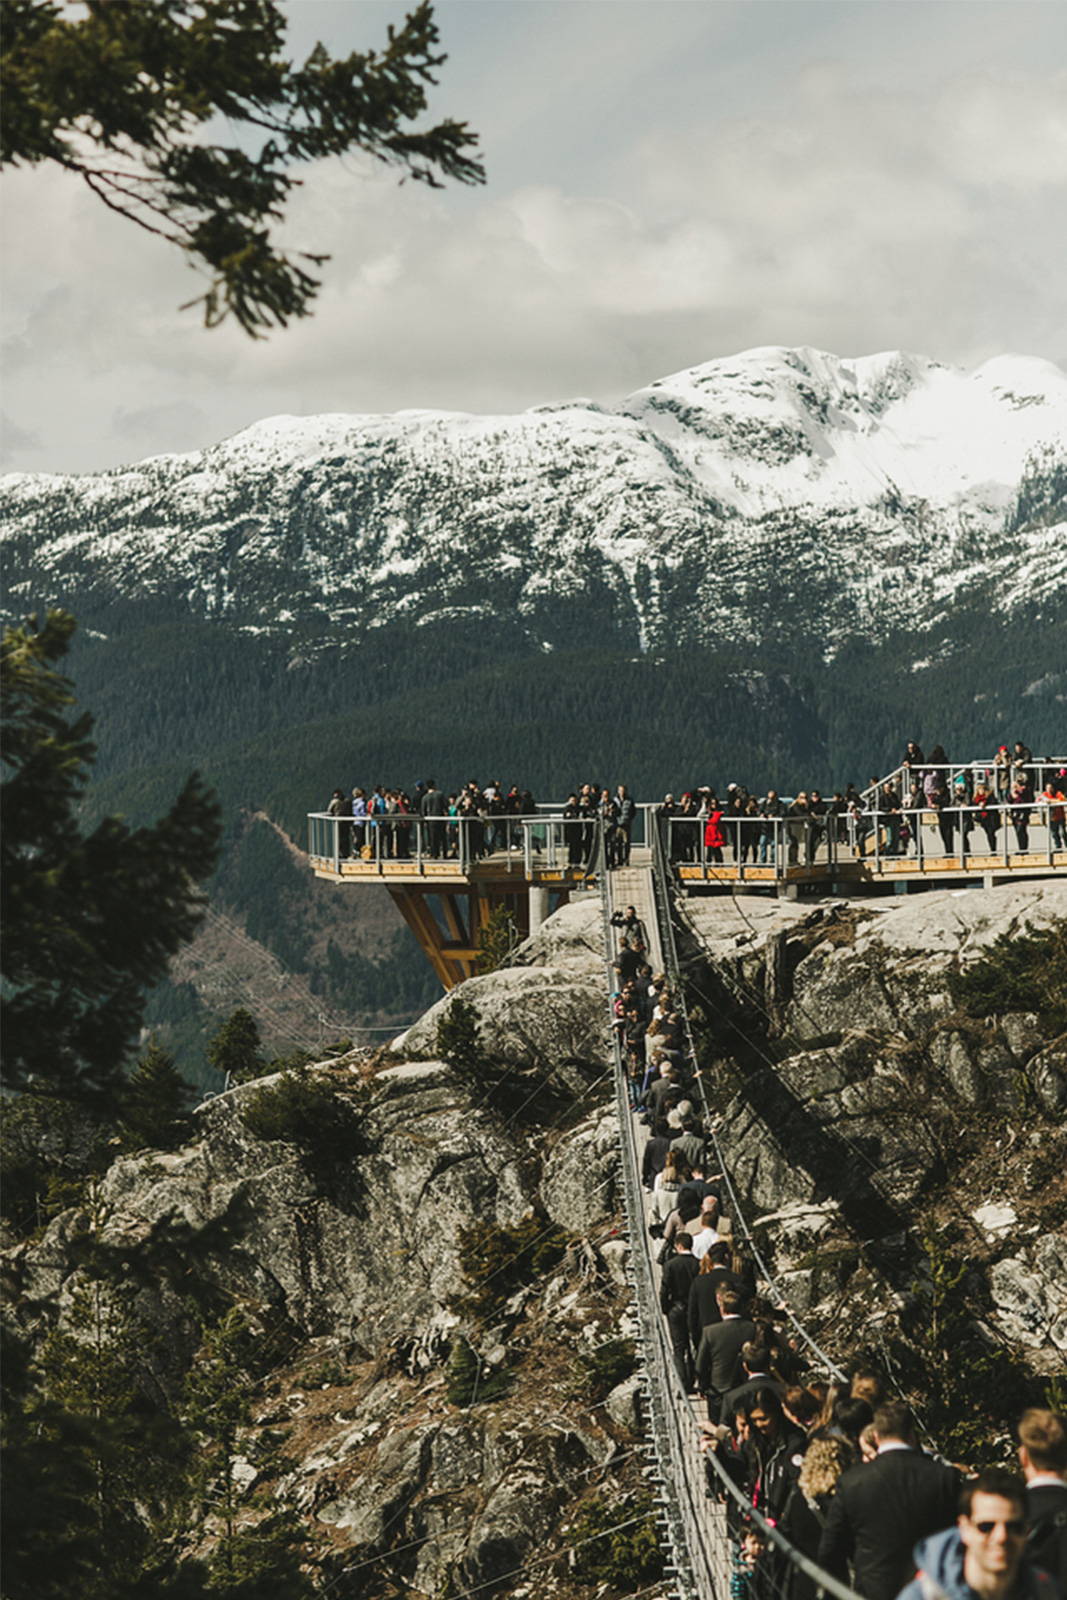 Guests lined up on bridge in Canadian mountains